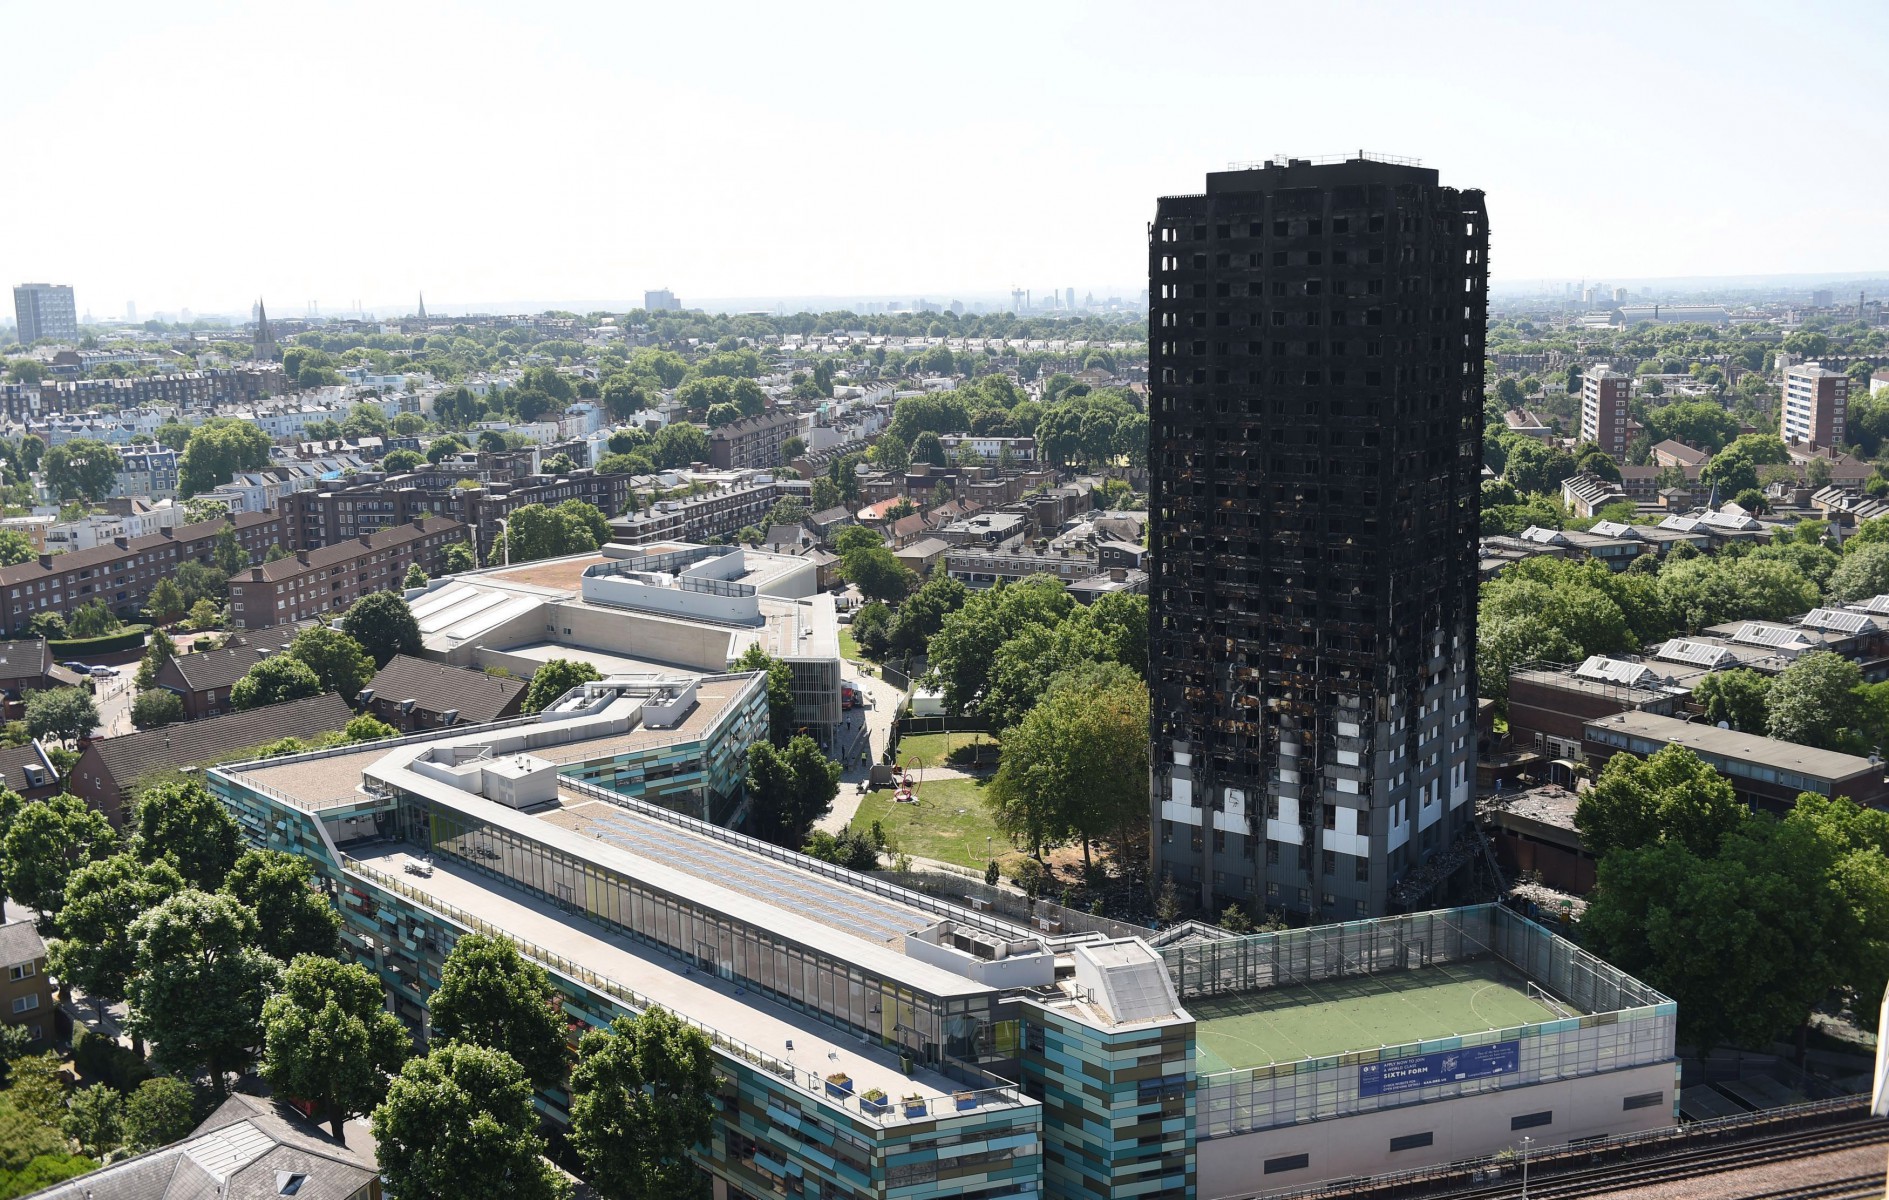 More than 70 people were killed in the Grenfell fire in 2017